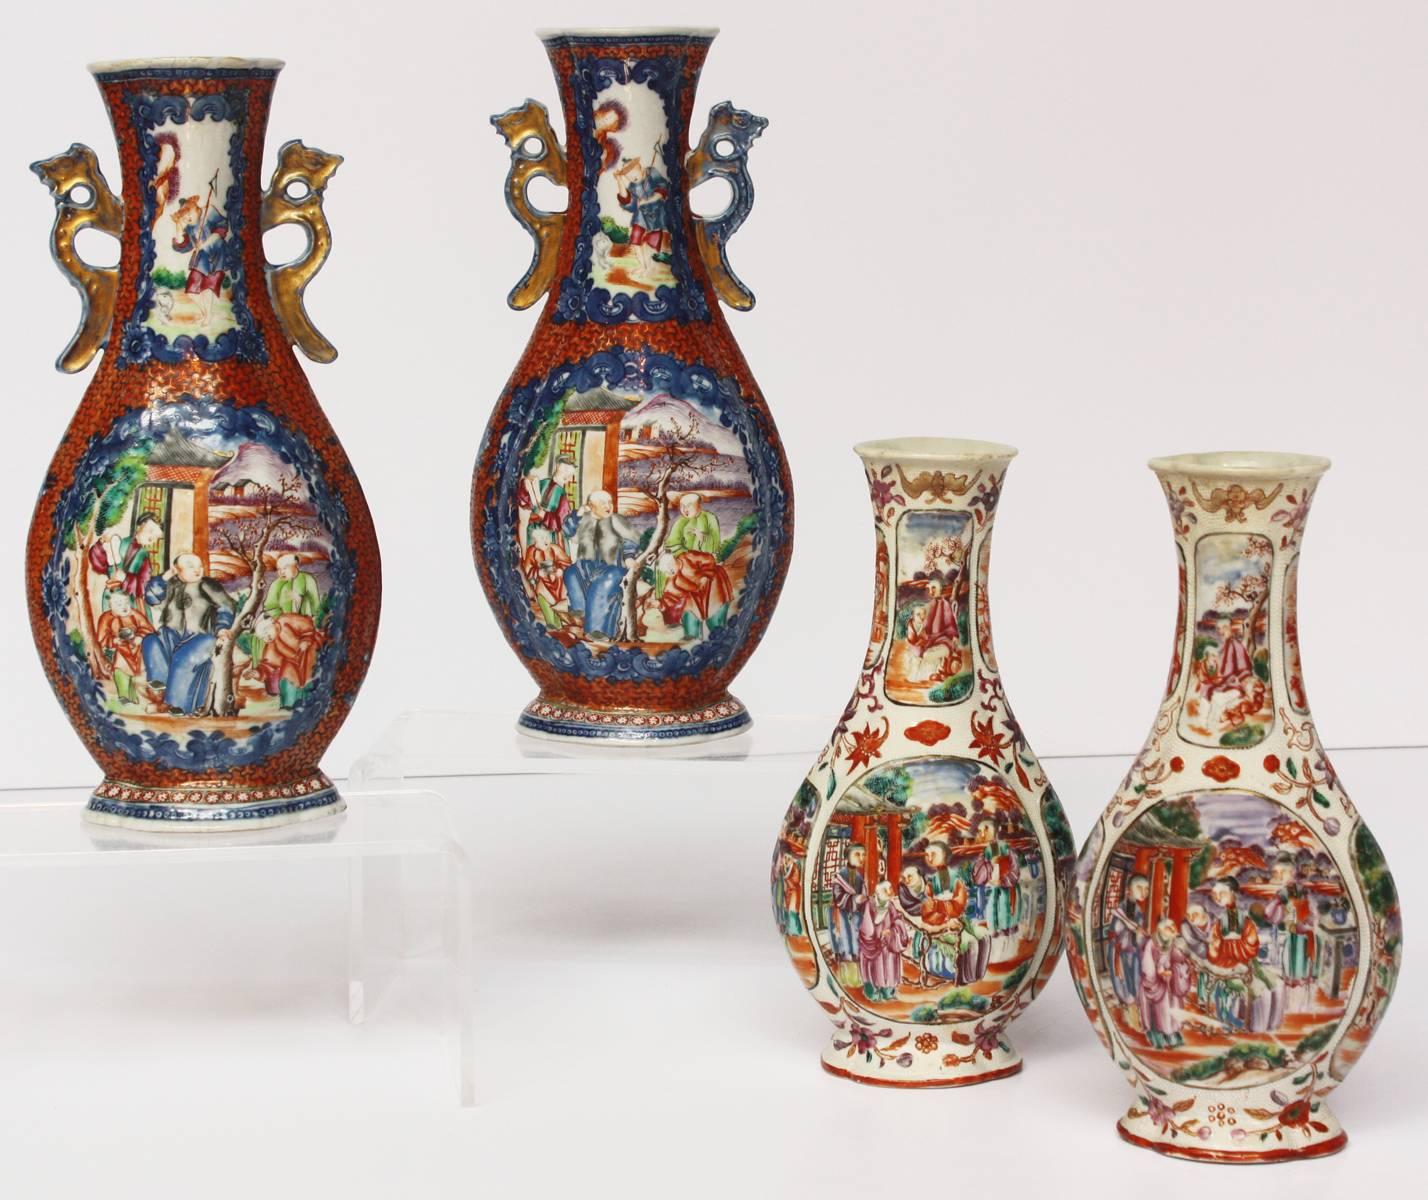 On left:
Pair of early 18th century mandarin pallet Chinese vases decorated with various scenes and gilt handles (on neck), orange ground with blue borders around scenes.

Measures: 11.5